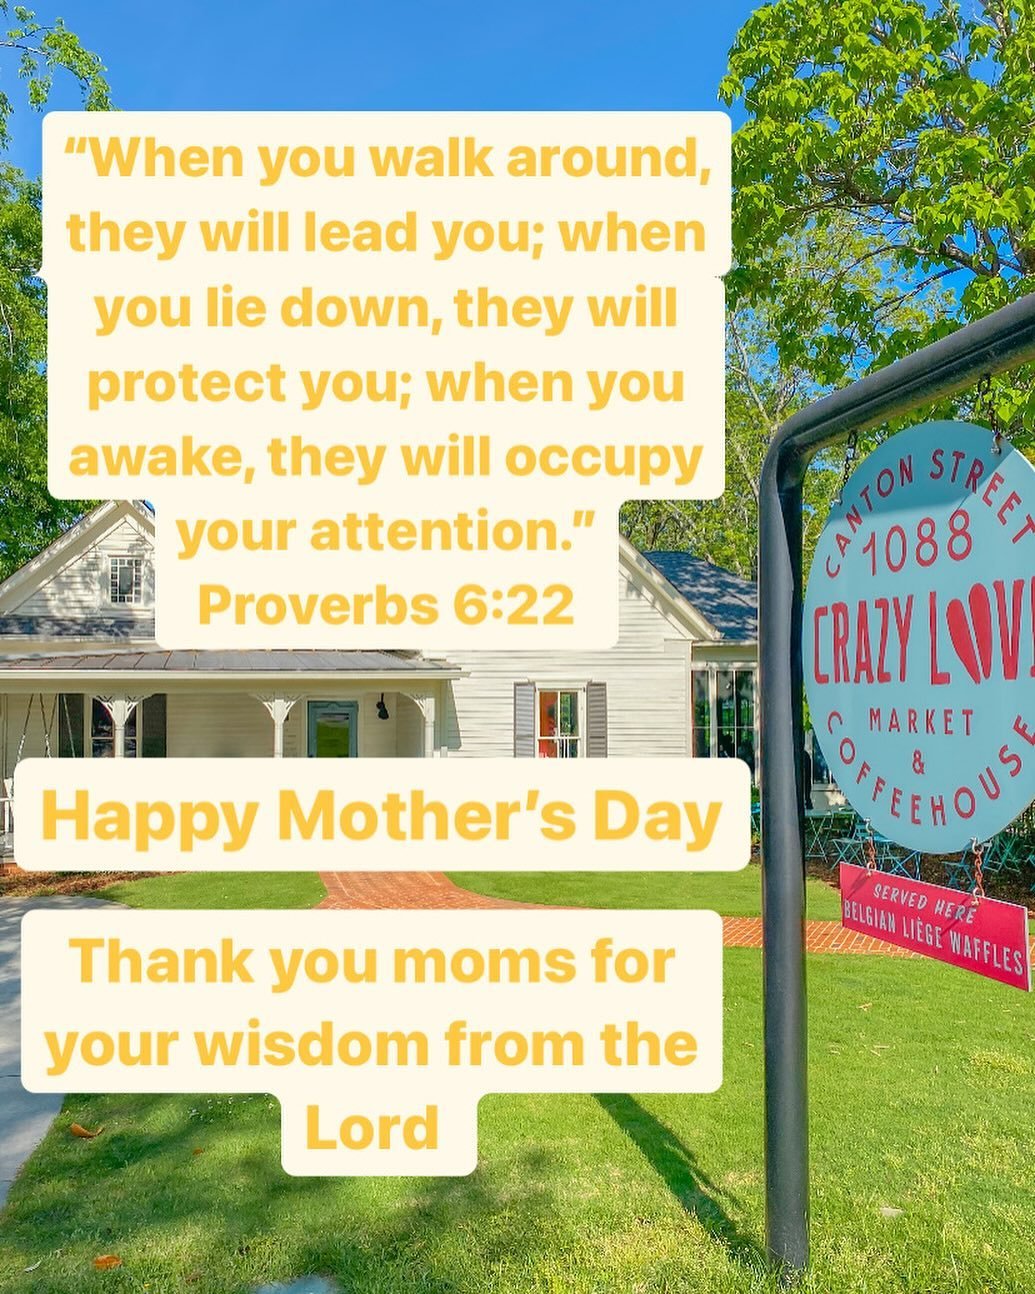 Thank you moms for all that you do! We love you ❤️❤️❤️